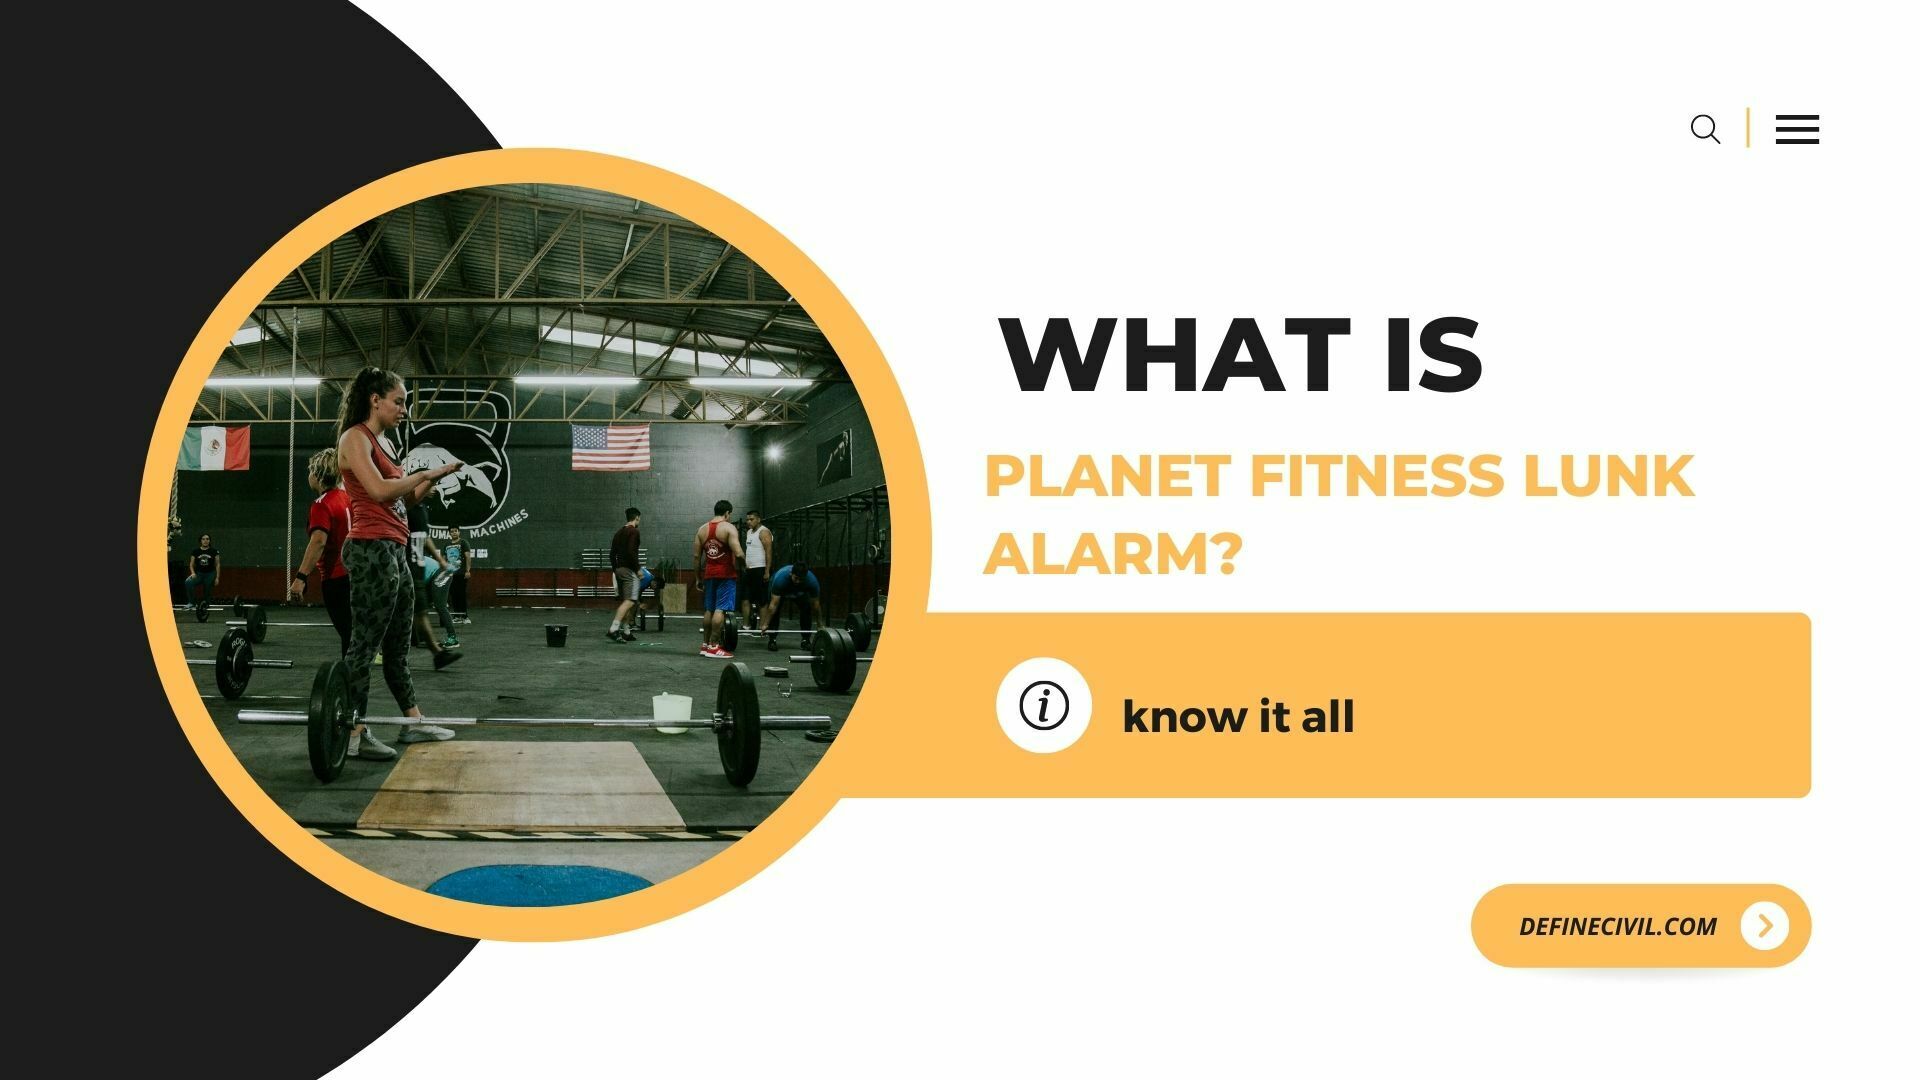 What is Planet Fitness Lunk Alarm?